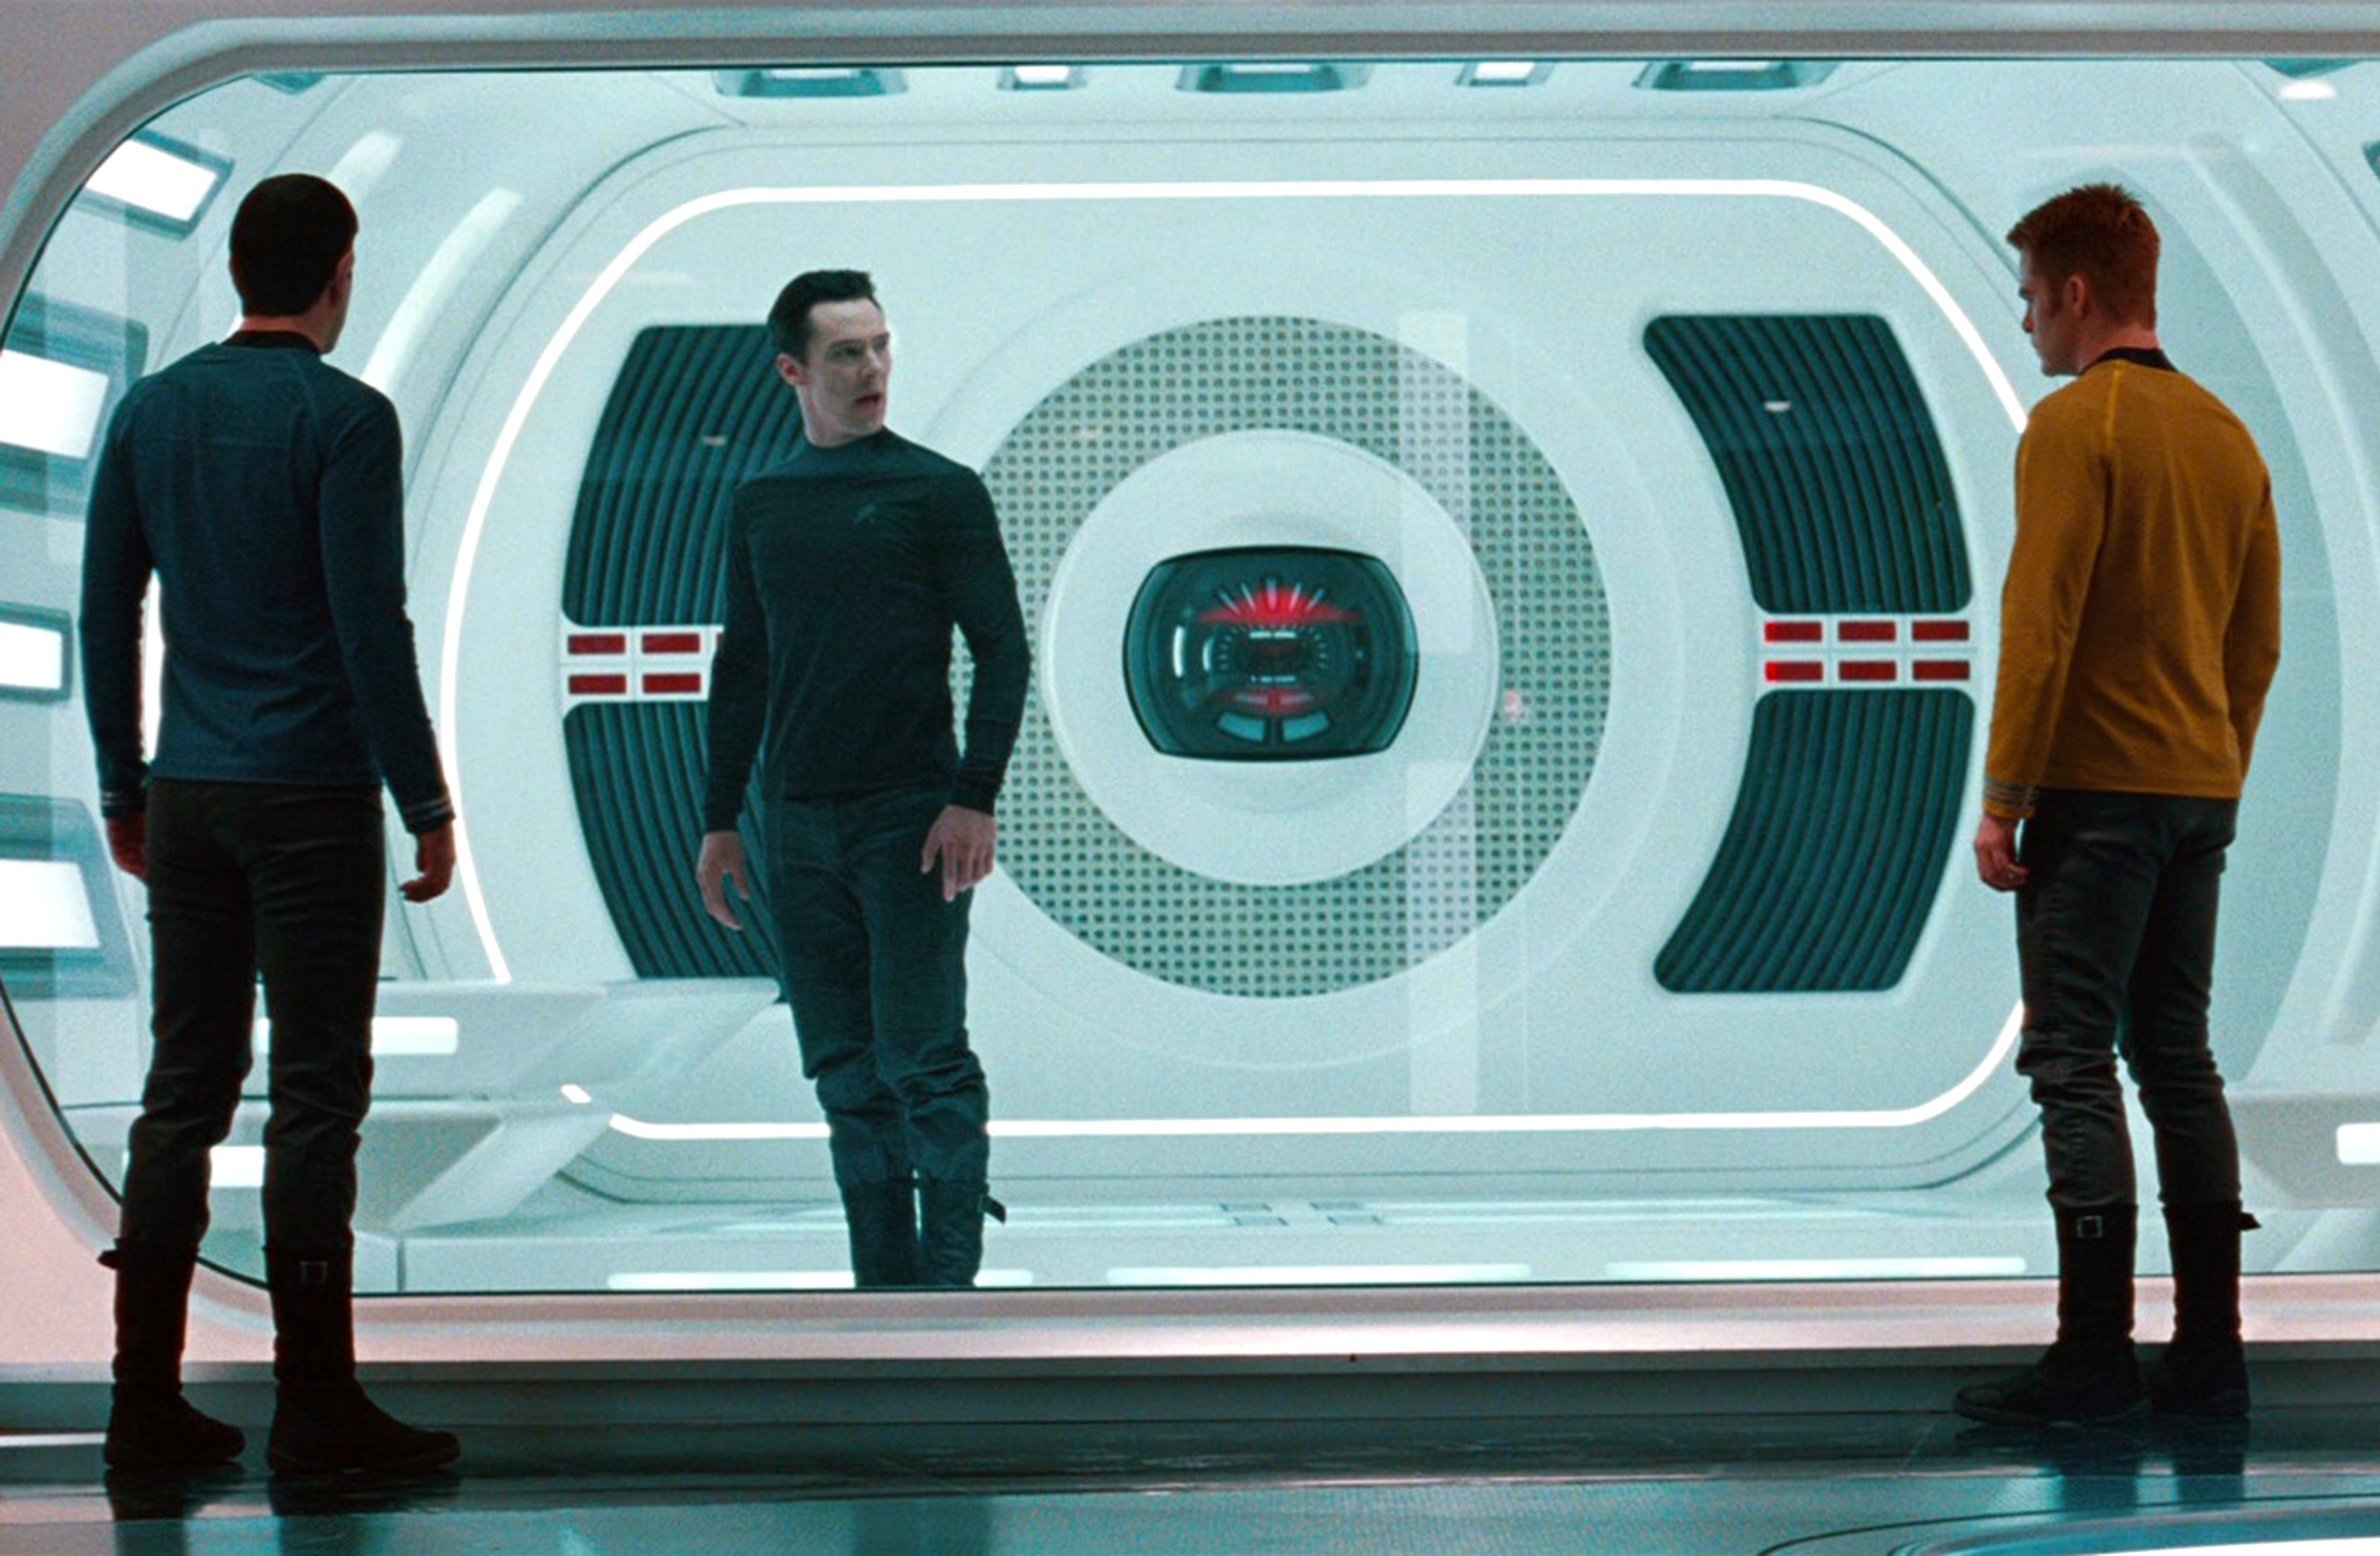 LOS ANGELES - MAY 16: Zachary Quinto as Commander Spock, Benedict Cumberbatch as Khan Noonien Singh and Chris Pine as Captain James T. Kirk in the 2013 movie, "Star Trek: Into Darkness." Release date May 16, 2013. Image is a screen grab. (Photo by CBS via Getty Images) (CBS Photo Archive—CBS via Getty Images)